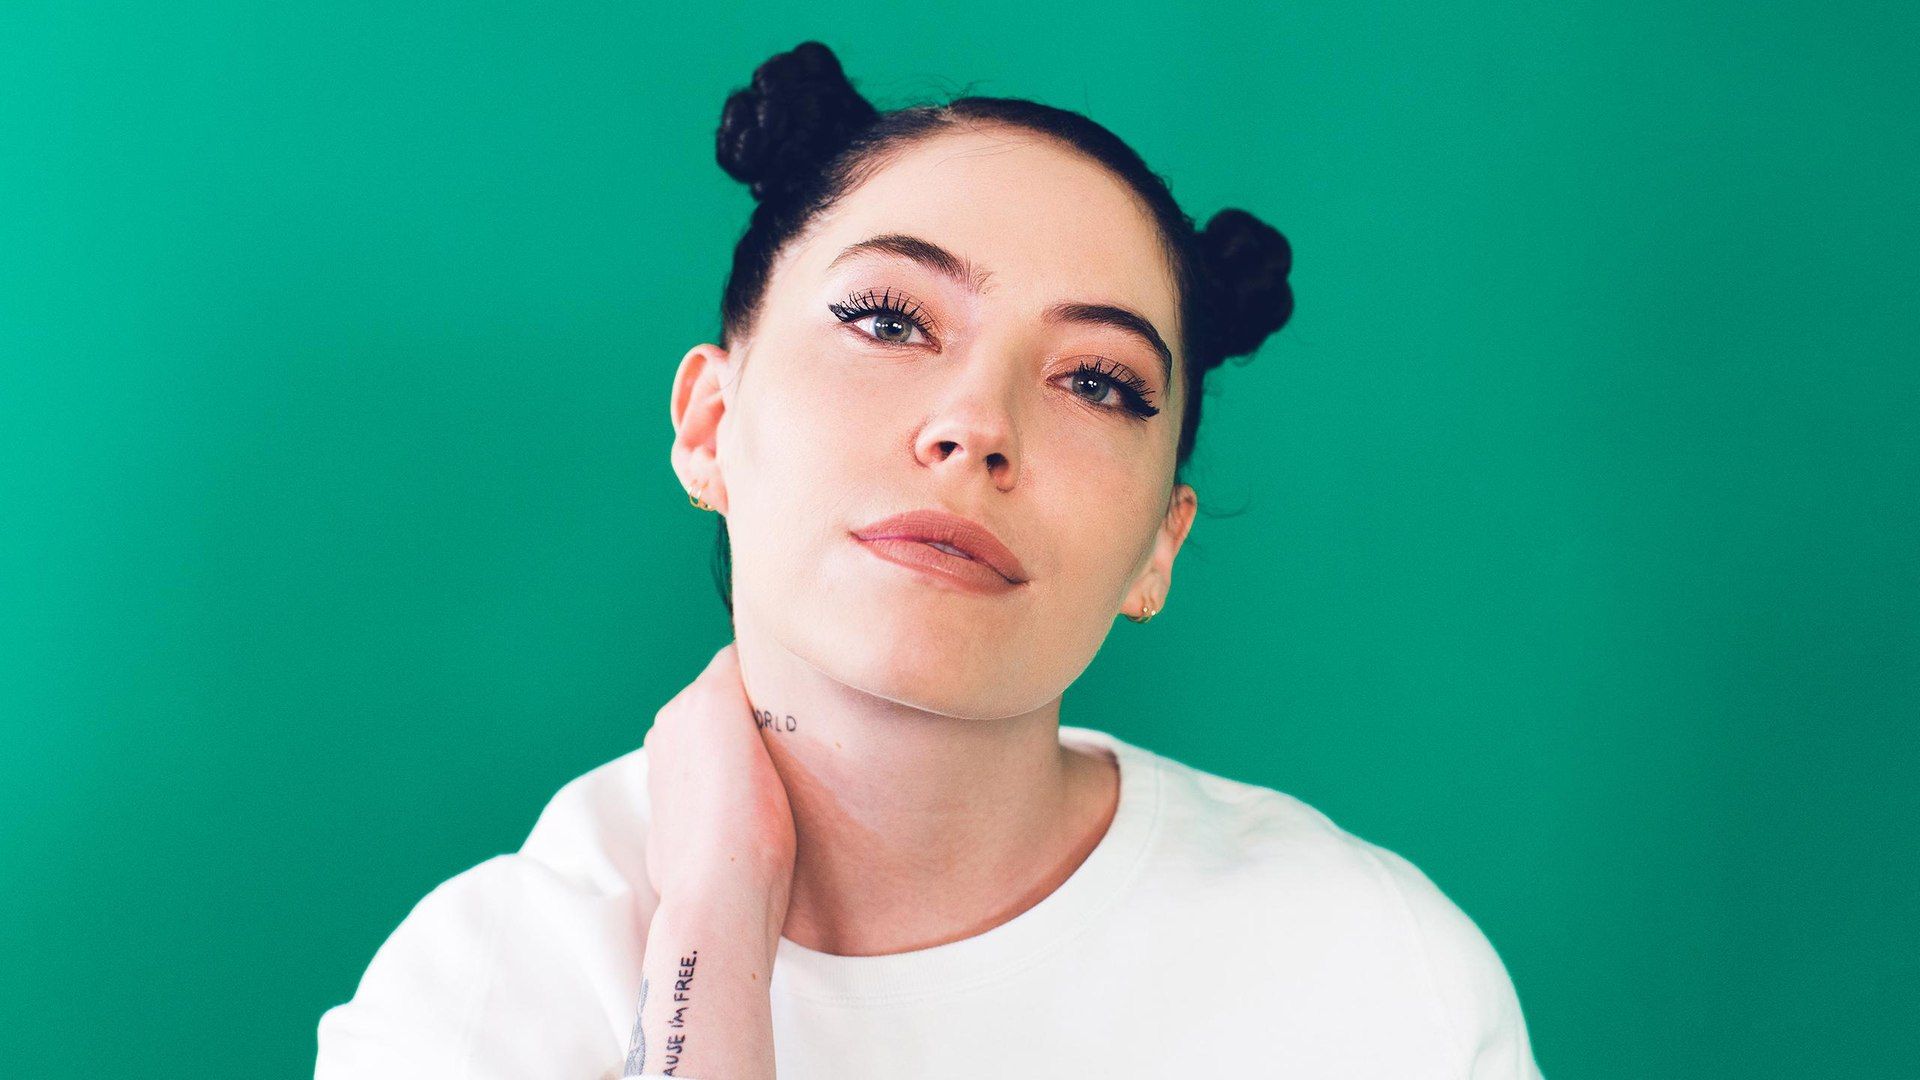 Bishop Briggs On Her First American Dating Experience.